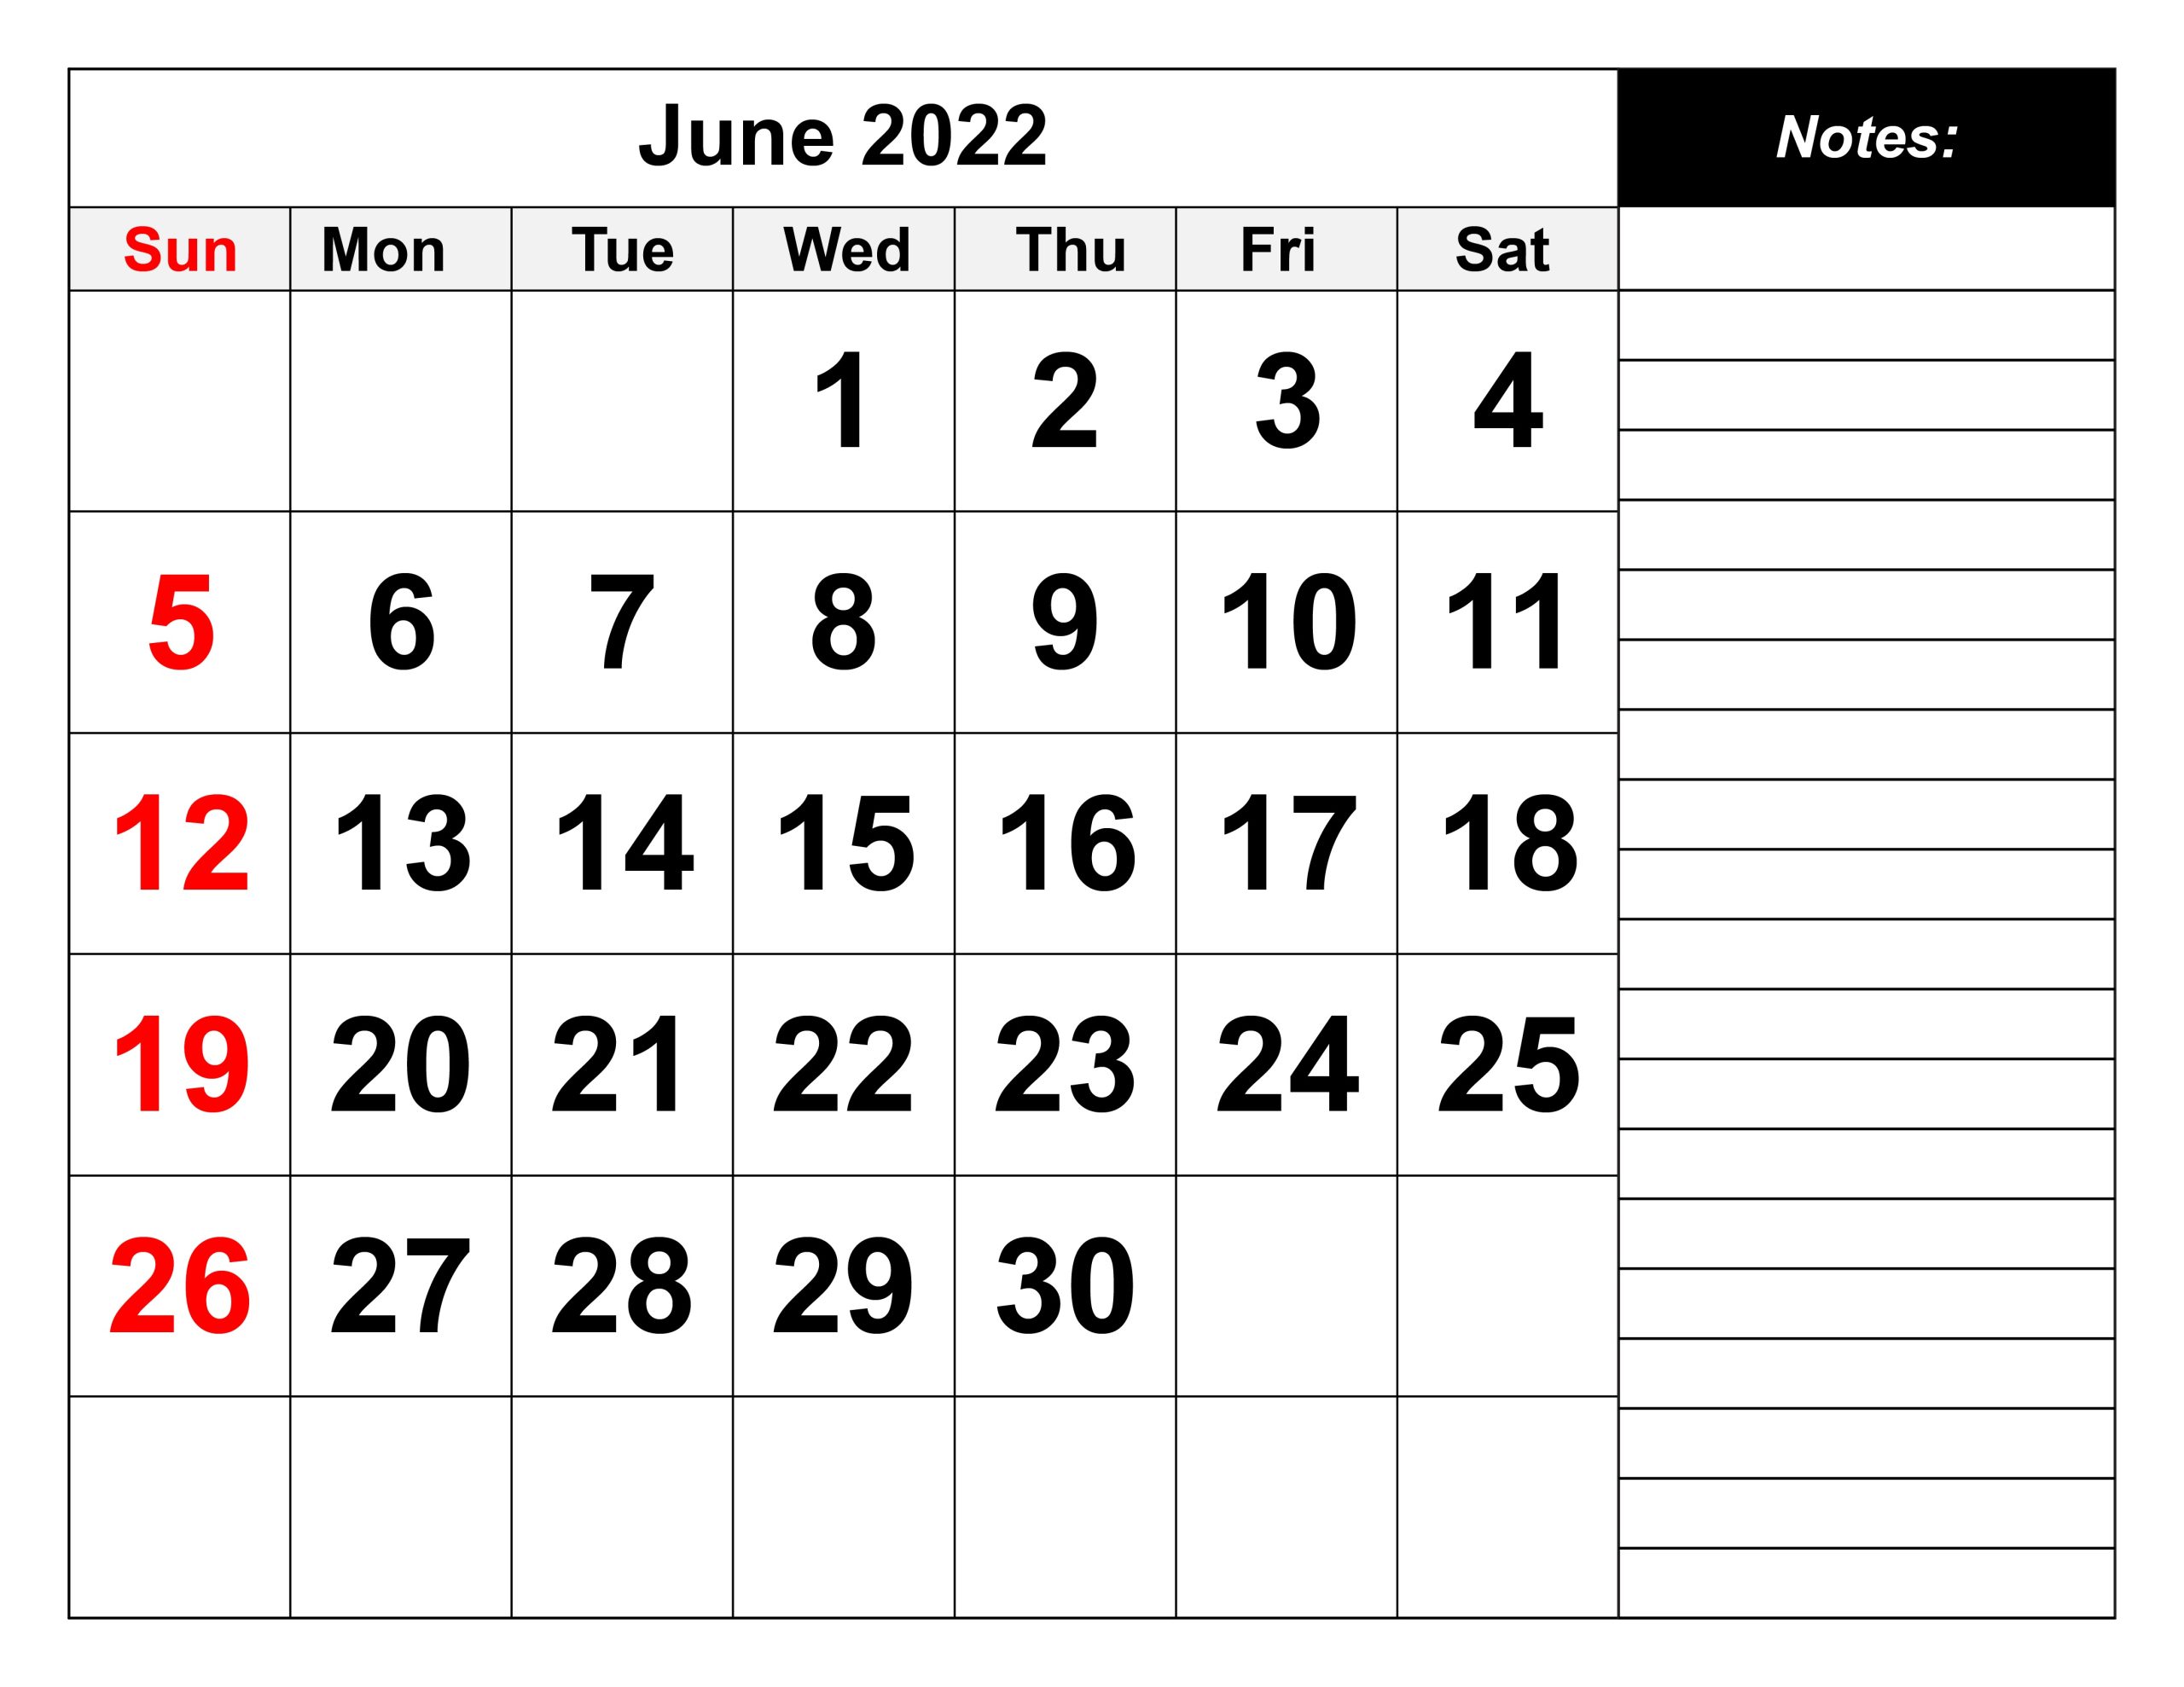 June 2022 Calendar With Holidays Notes